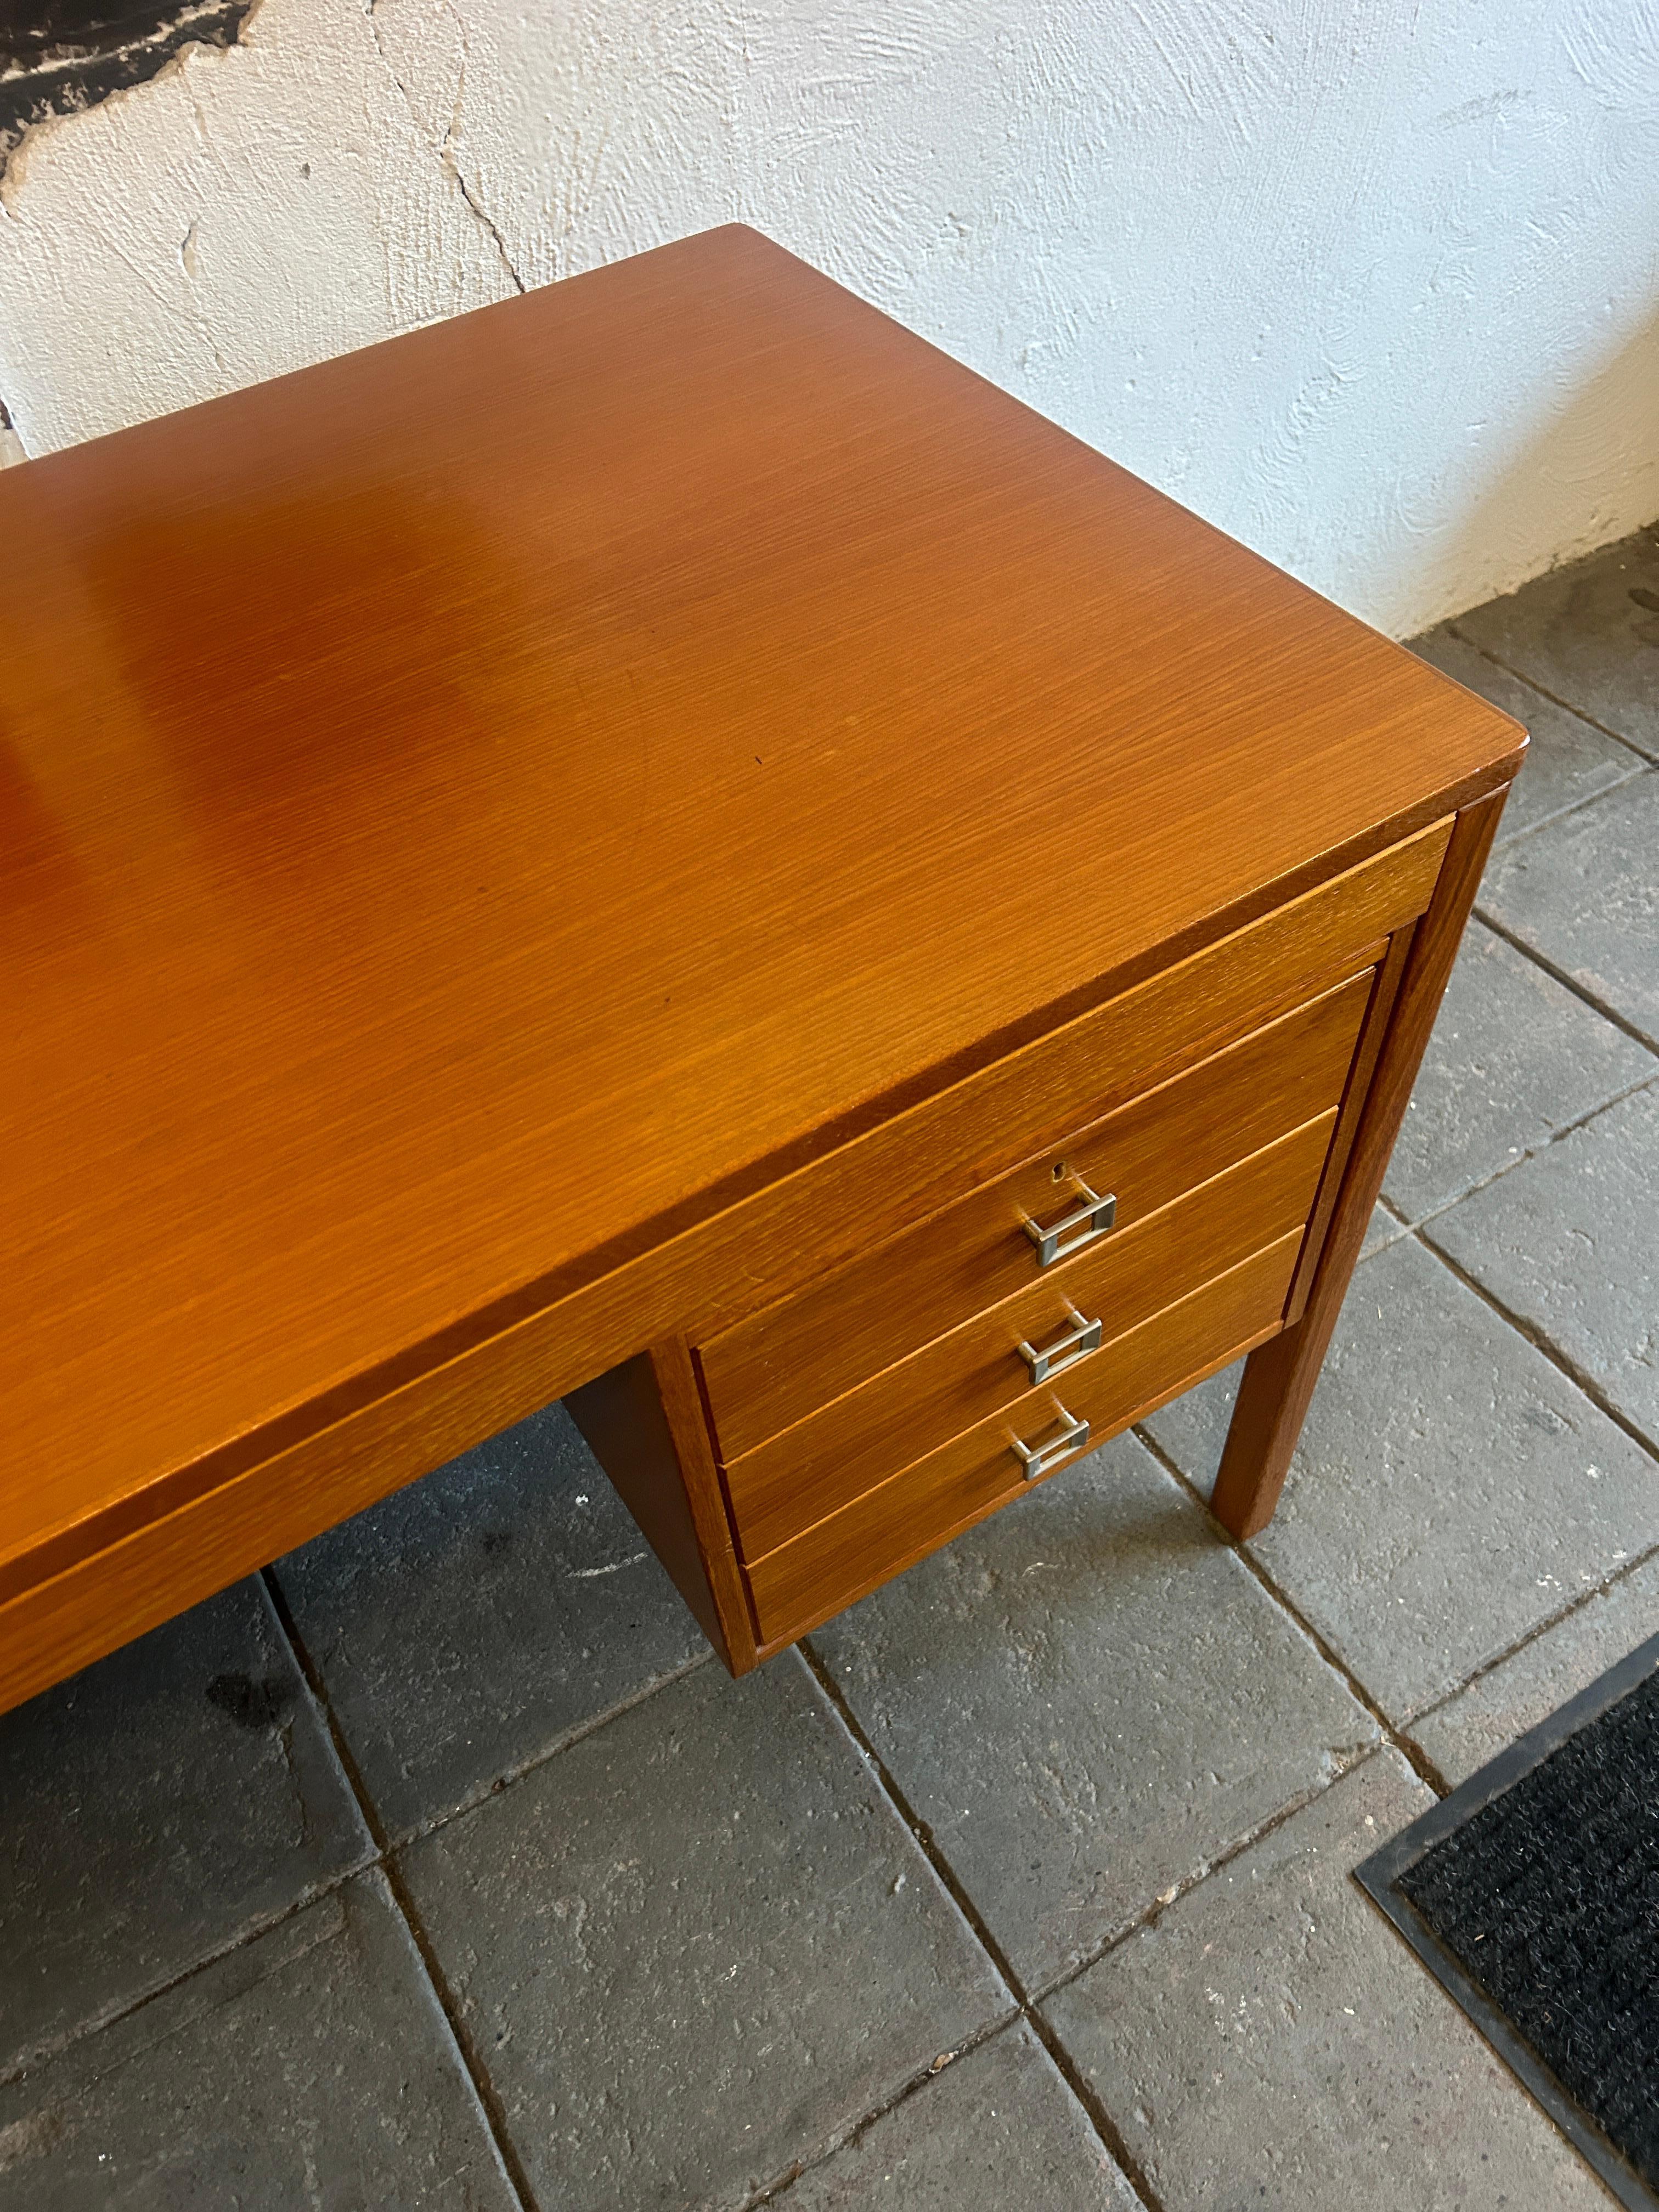 Mid century Danish modern teak desk with nickel handles with key. Kneehole desk with (3) slim drawers on the left and (1) large file drawer on the right. Nice nickel pulls and key. Top drawer on left and large drawer on right locks. Nice teak wood